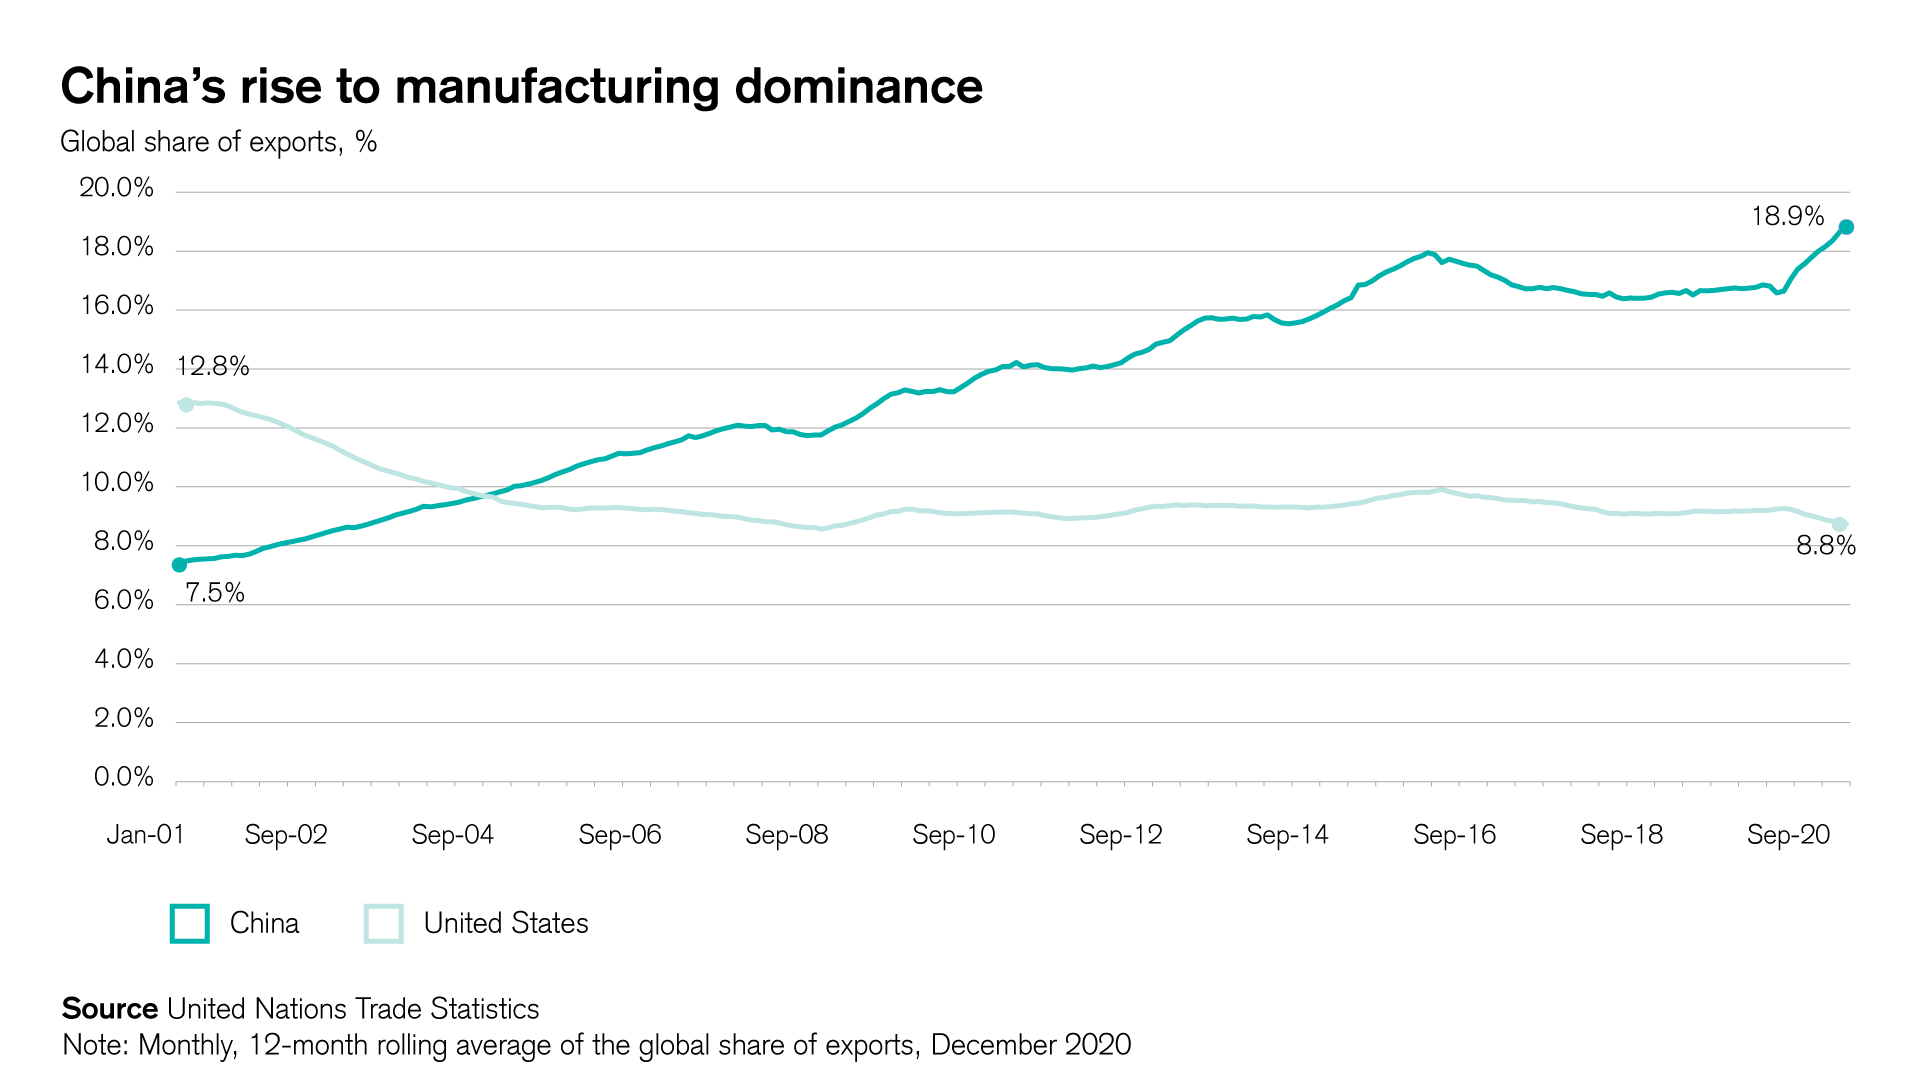 China's rise to manufacturing dominance